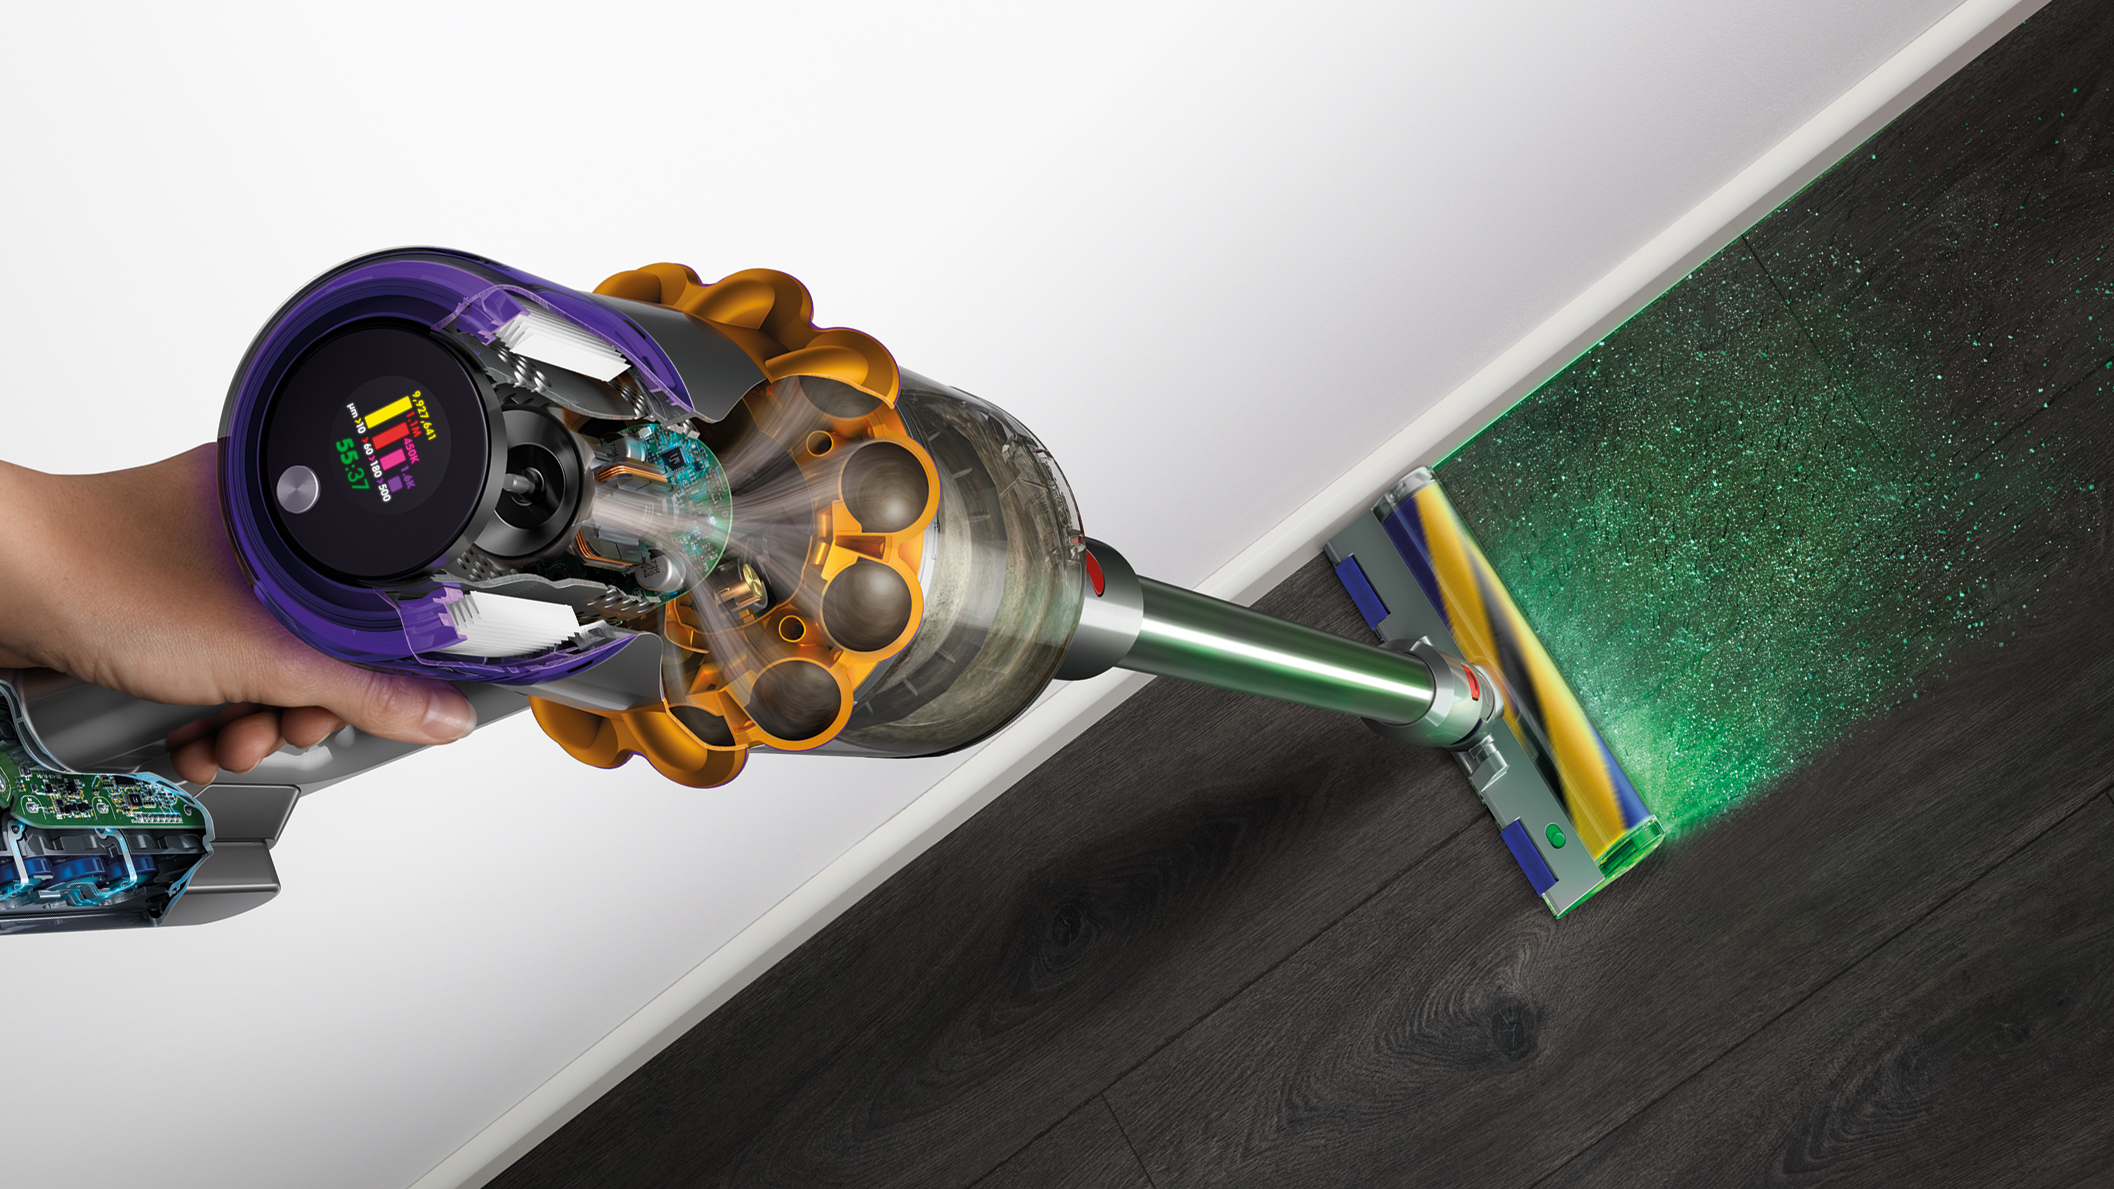 The New Dyson Vacuum Uses Lasers to Spot Every Single Crumb